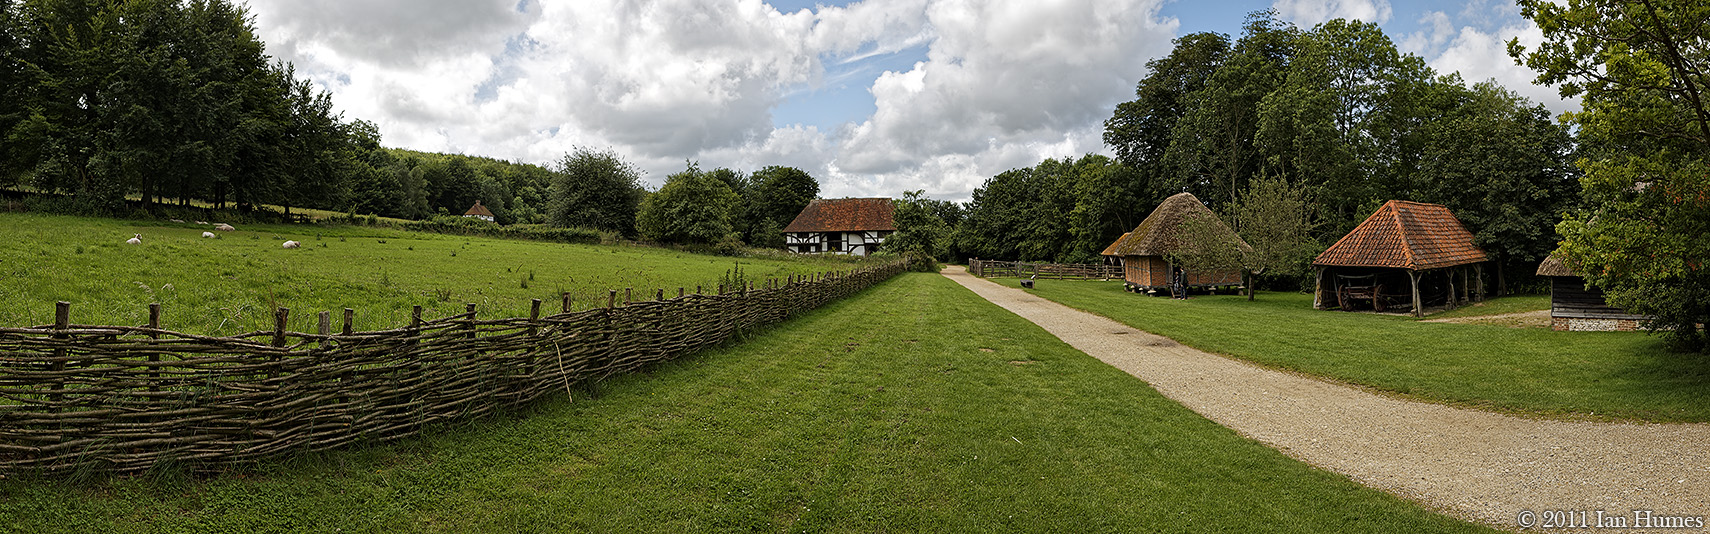 Weald and Downland Museum - West Sussex